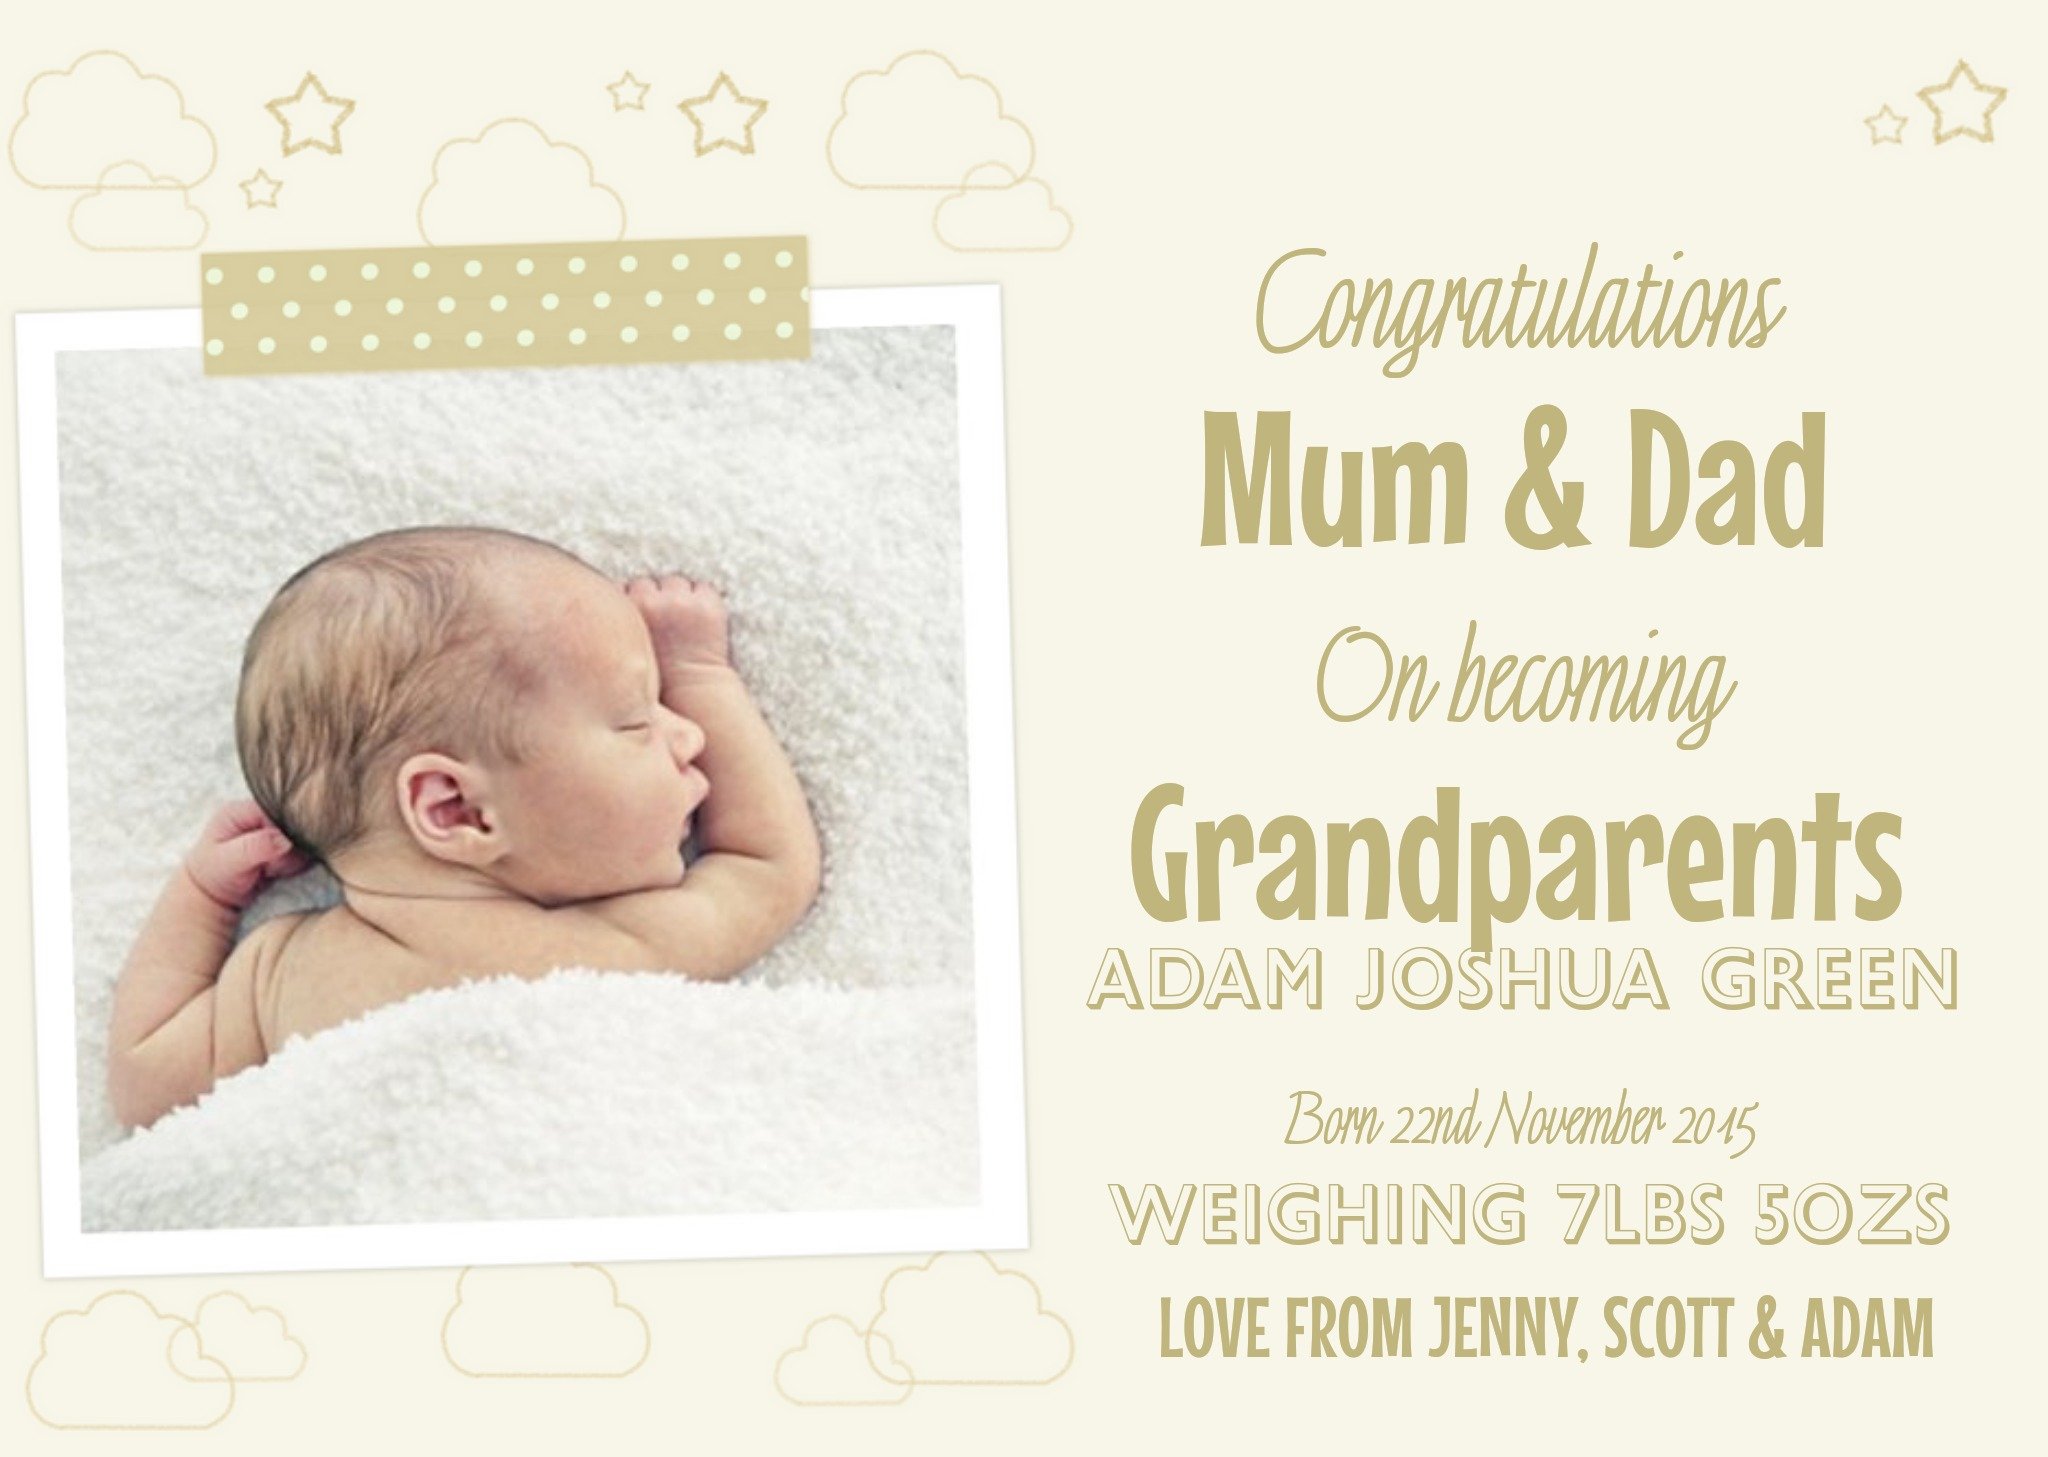 Moonpig Clouds And Stars Photo Upload Congratulations On Becoming Grandparents Card Ecard